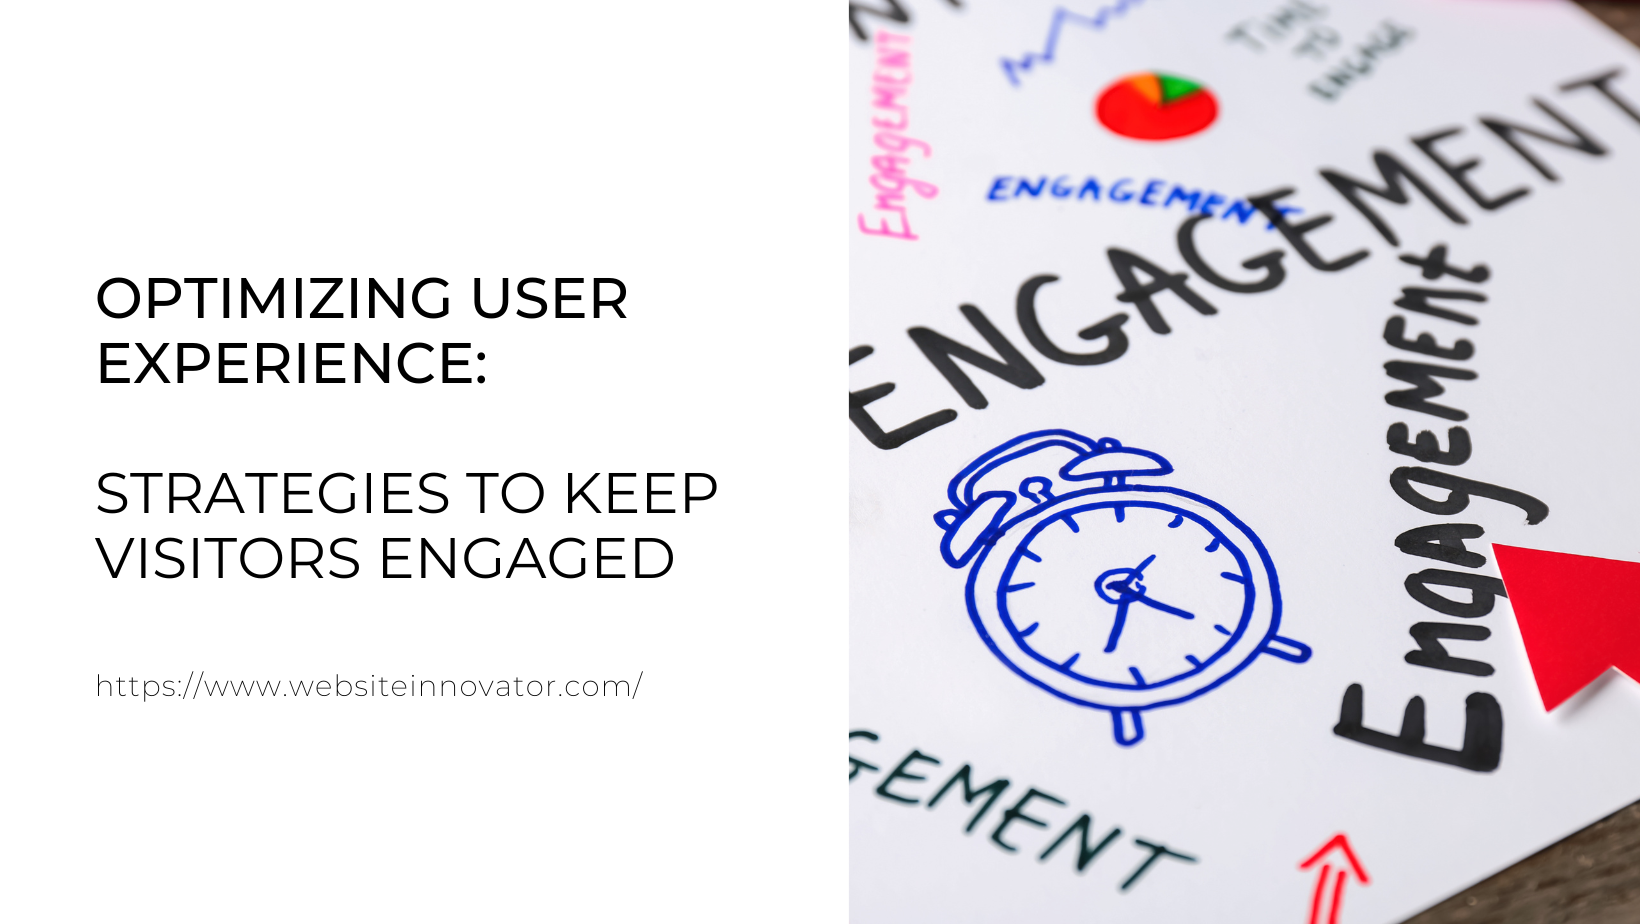 Optimizing User Experience: Strategies to Keep Visitors Engaged